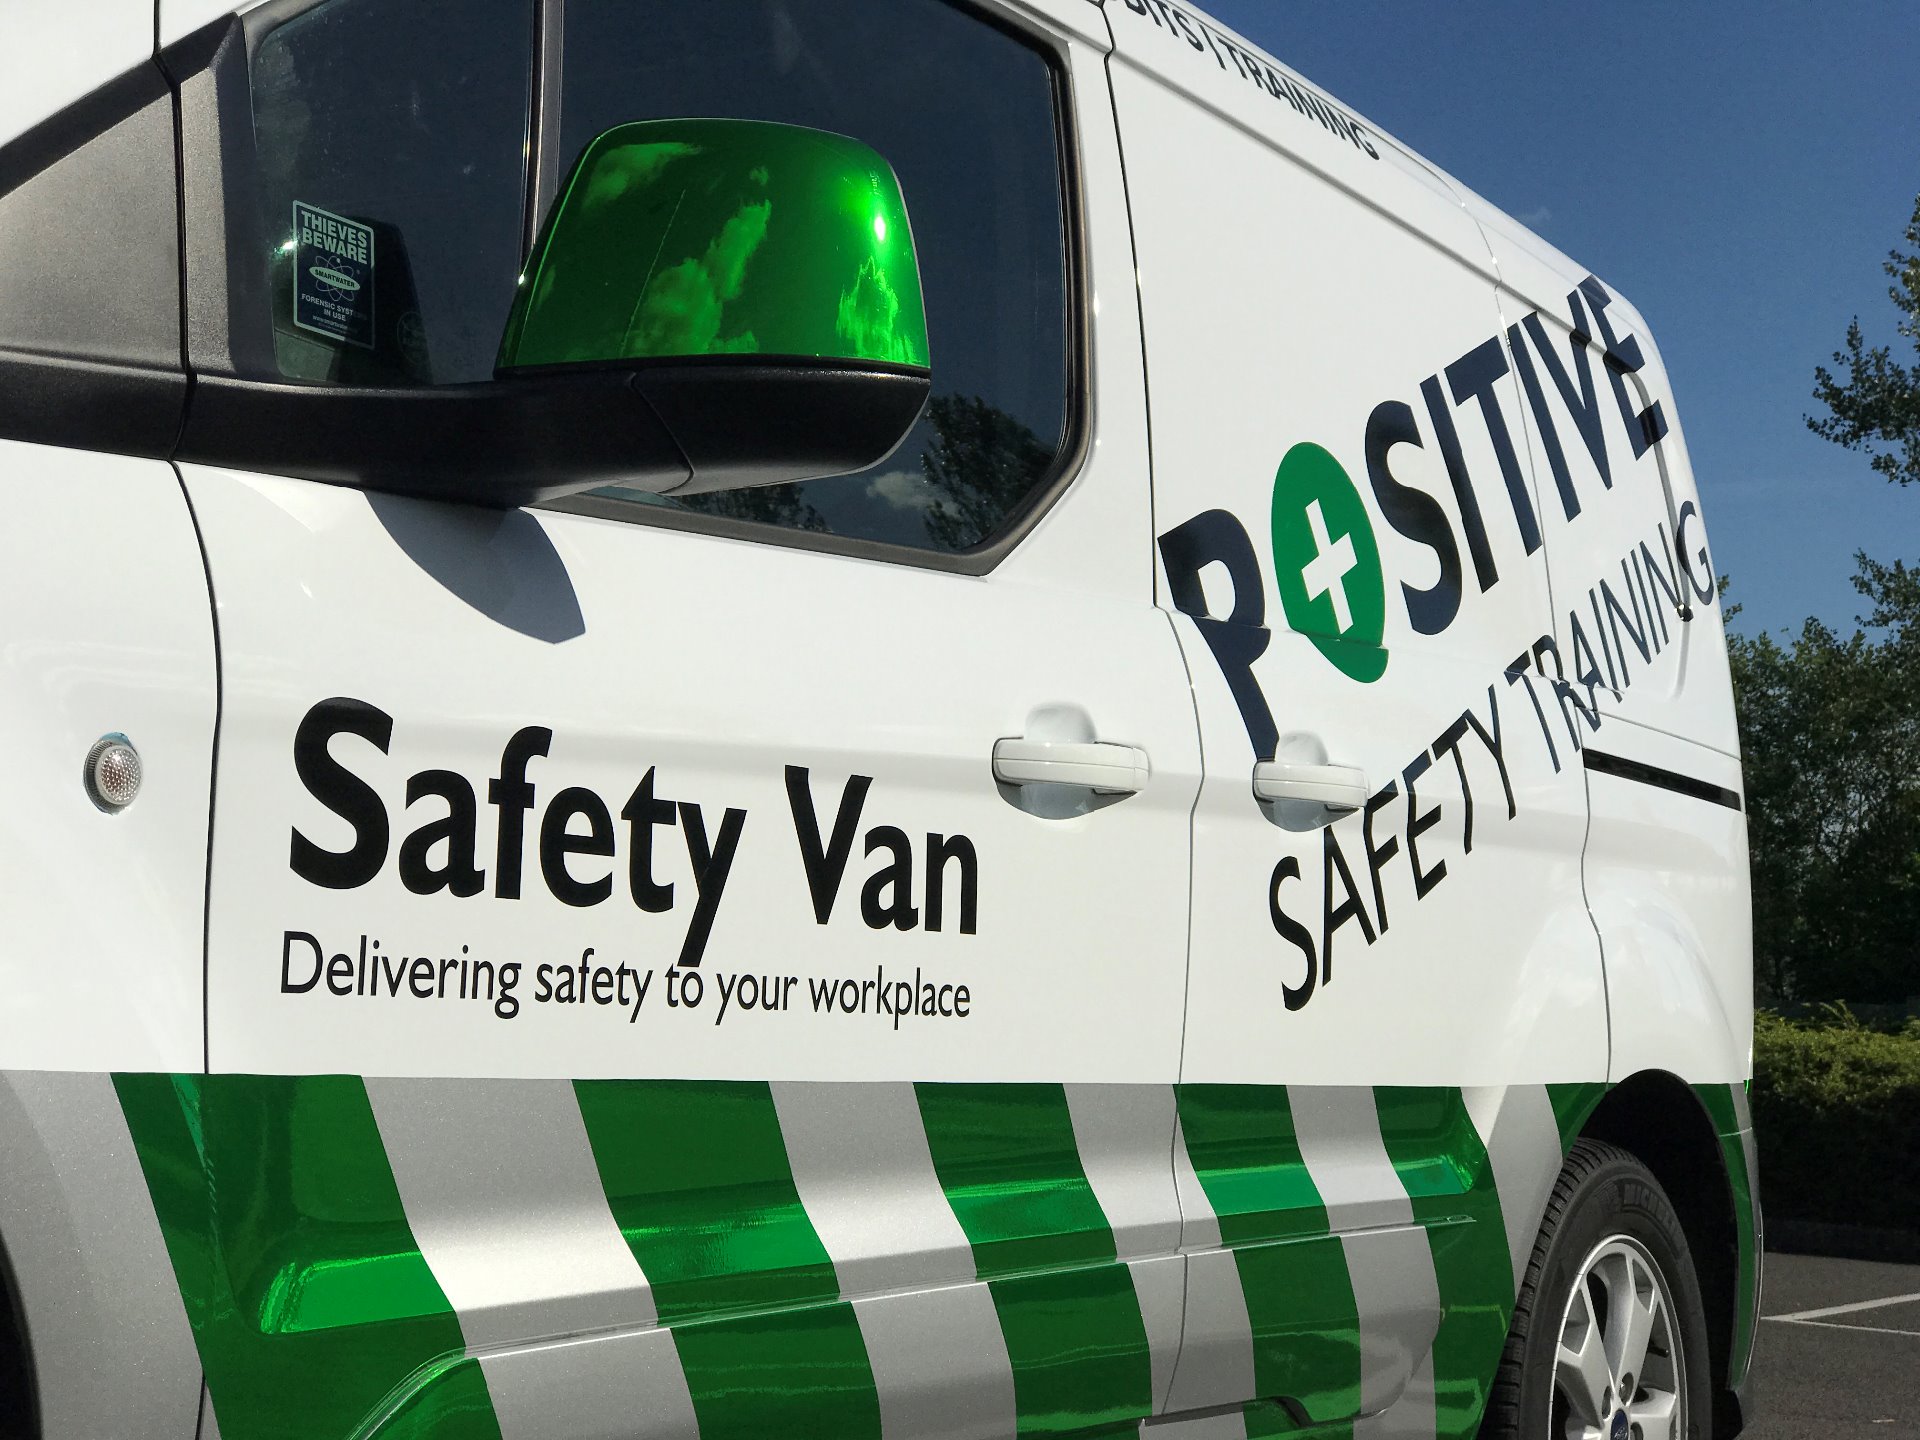 Safety Van - Delivering Safety to your workplace